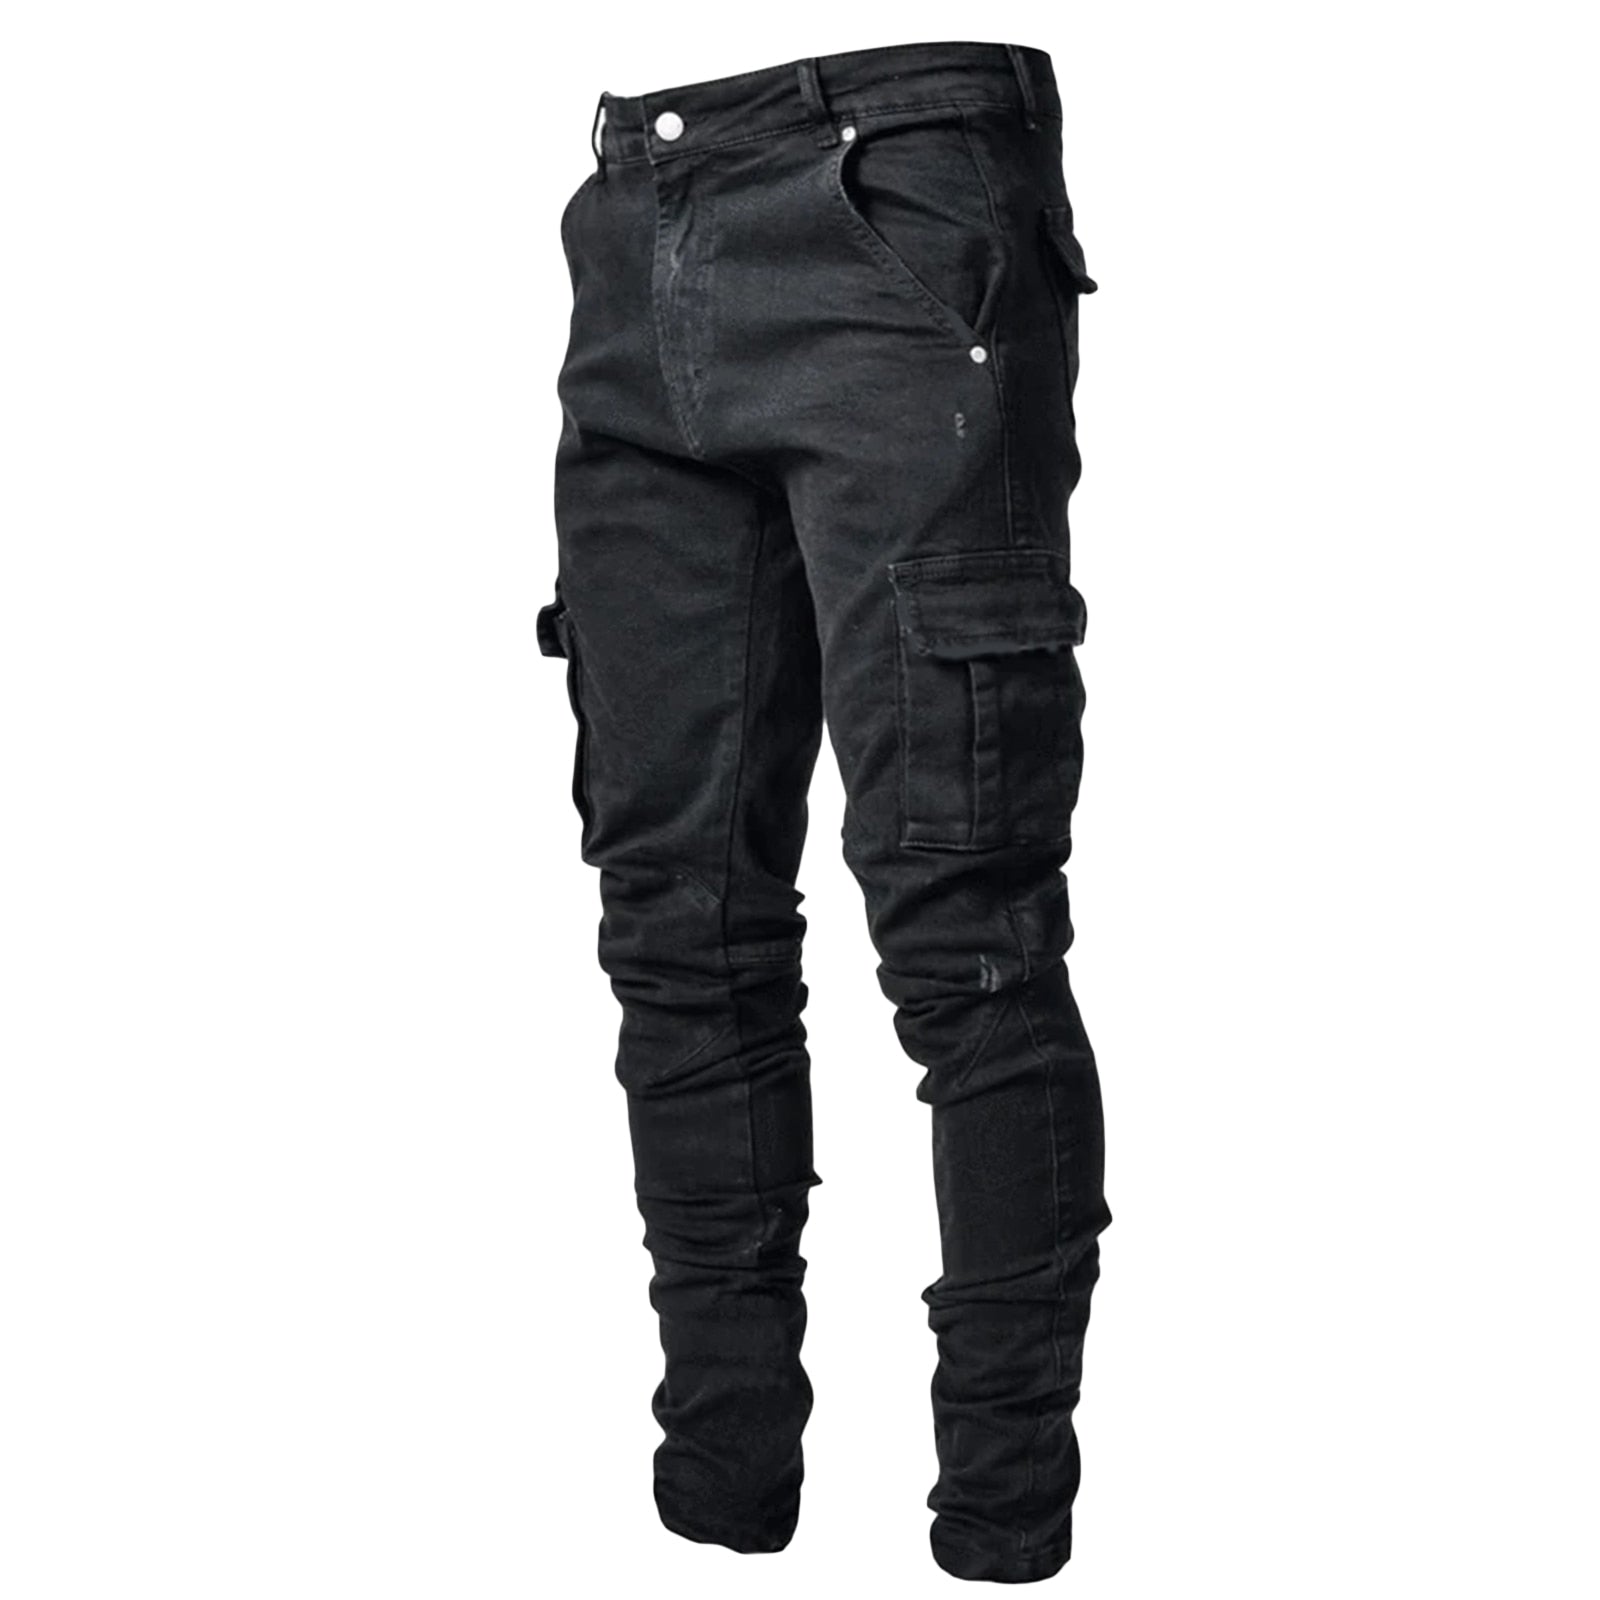 3 Styles Men Stretchy Ripped Skinny Biker Embroidery Print Jeans Destroyed Hole Taped Slim Fit Denim Scratched High Quality Jean 3 Styles Men Stretchy Ripped Skinny Biker Embroidery Print Jeans Destroyed Hole Taped Slim Fit Denim Scratched High Quality Jean Foreverking